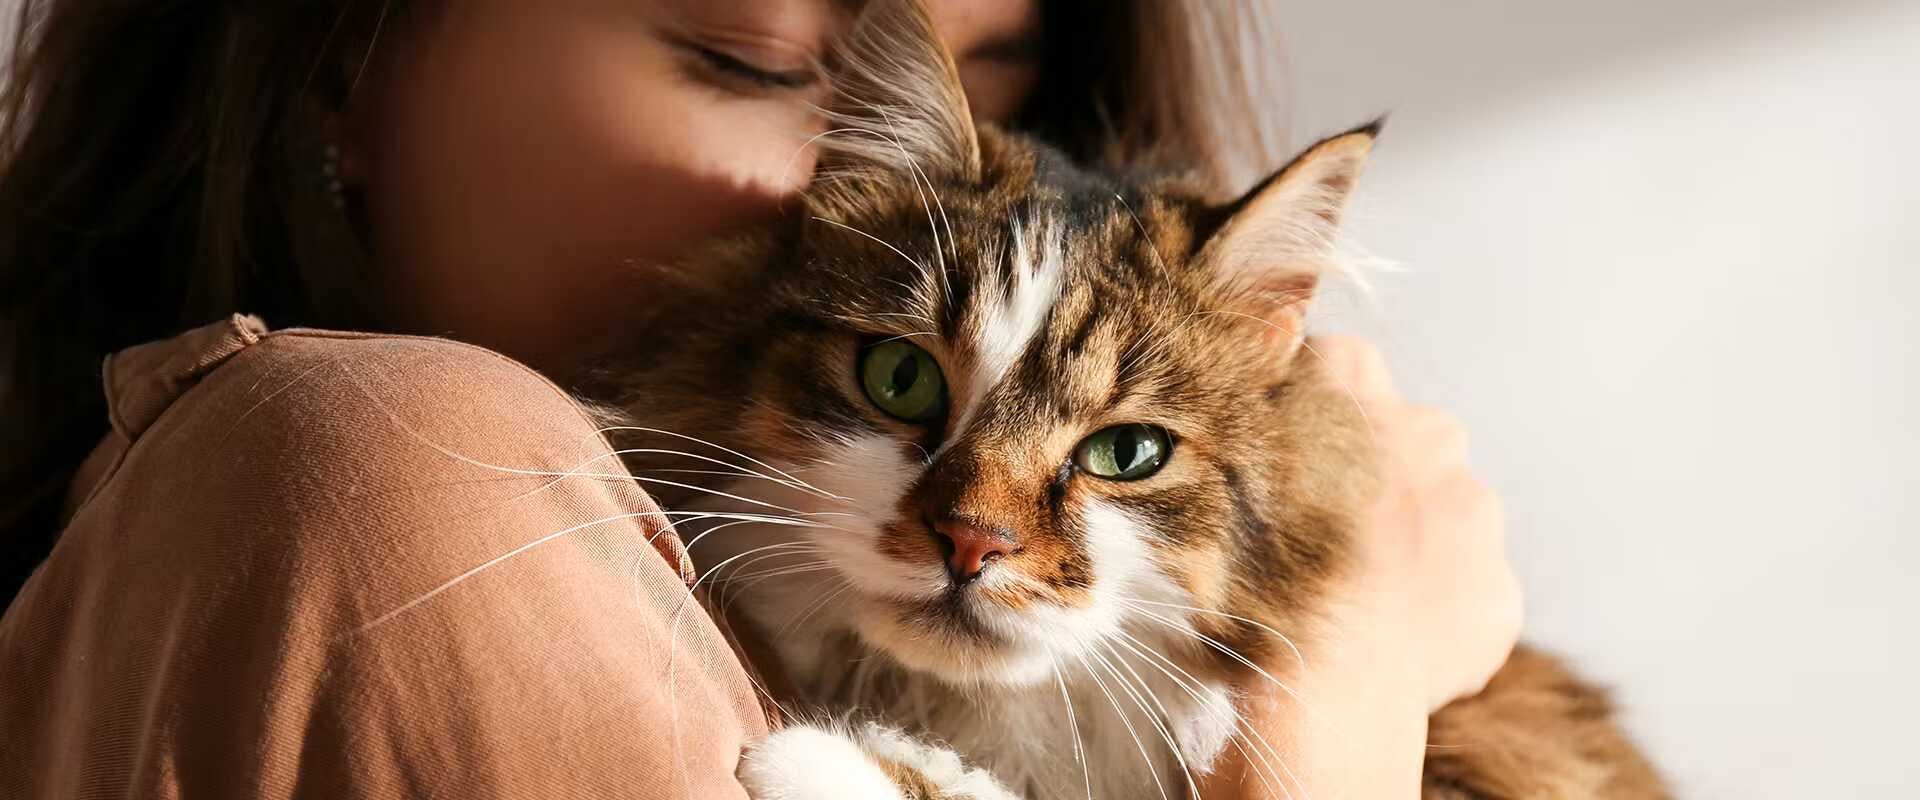 A woman hugging and kissing a fluffy cat